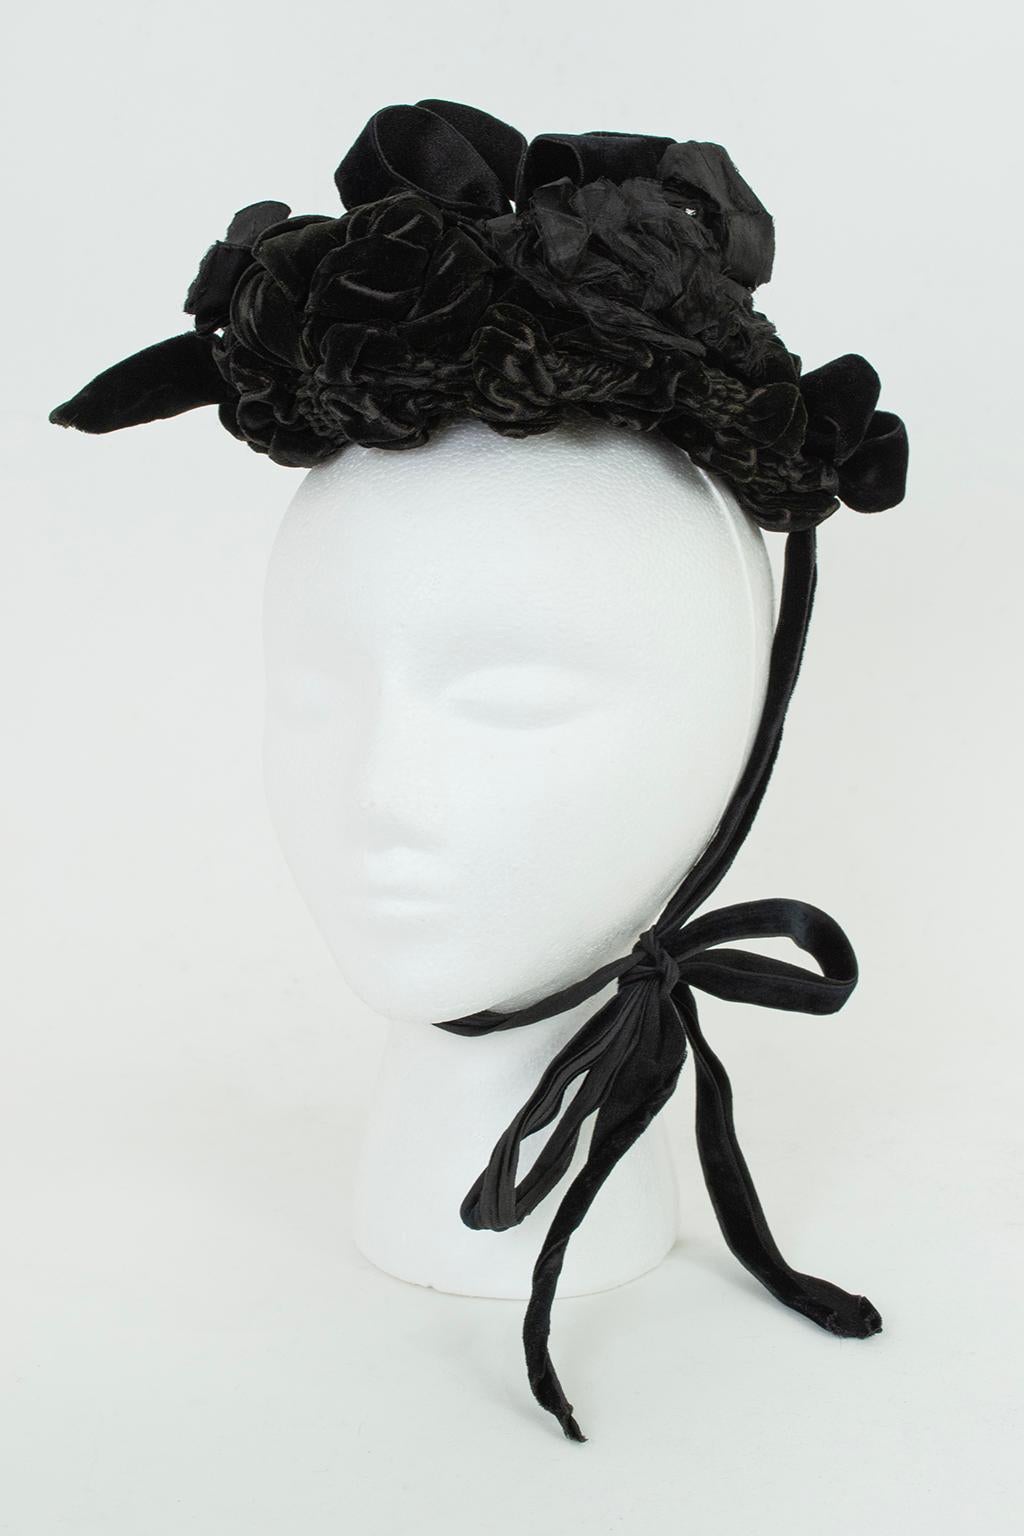 Worn during the Victorian lady’s two-year mourning period, this petite hat telegraphed propriety and solemnity without sacrificing style. Featuring a stiff skullcap adorned with silk velvet bows and gathers, it is accentuated by silk ribbon roses.